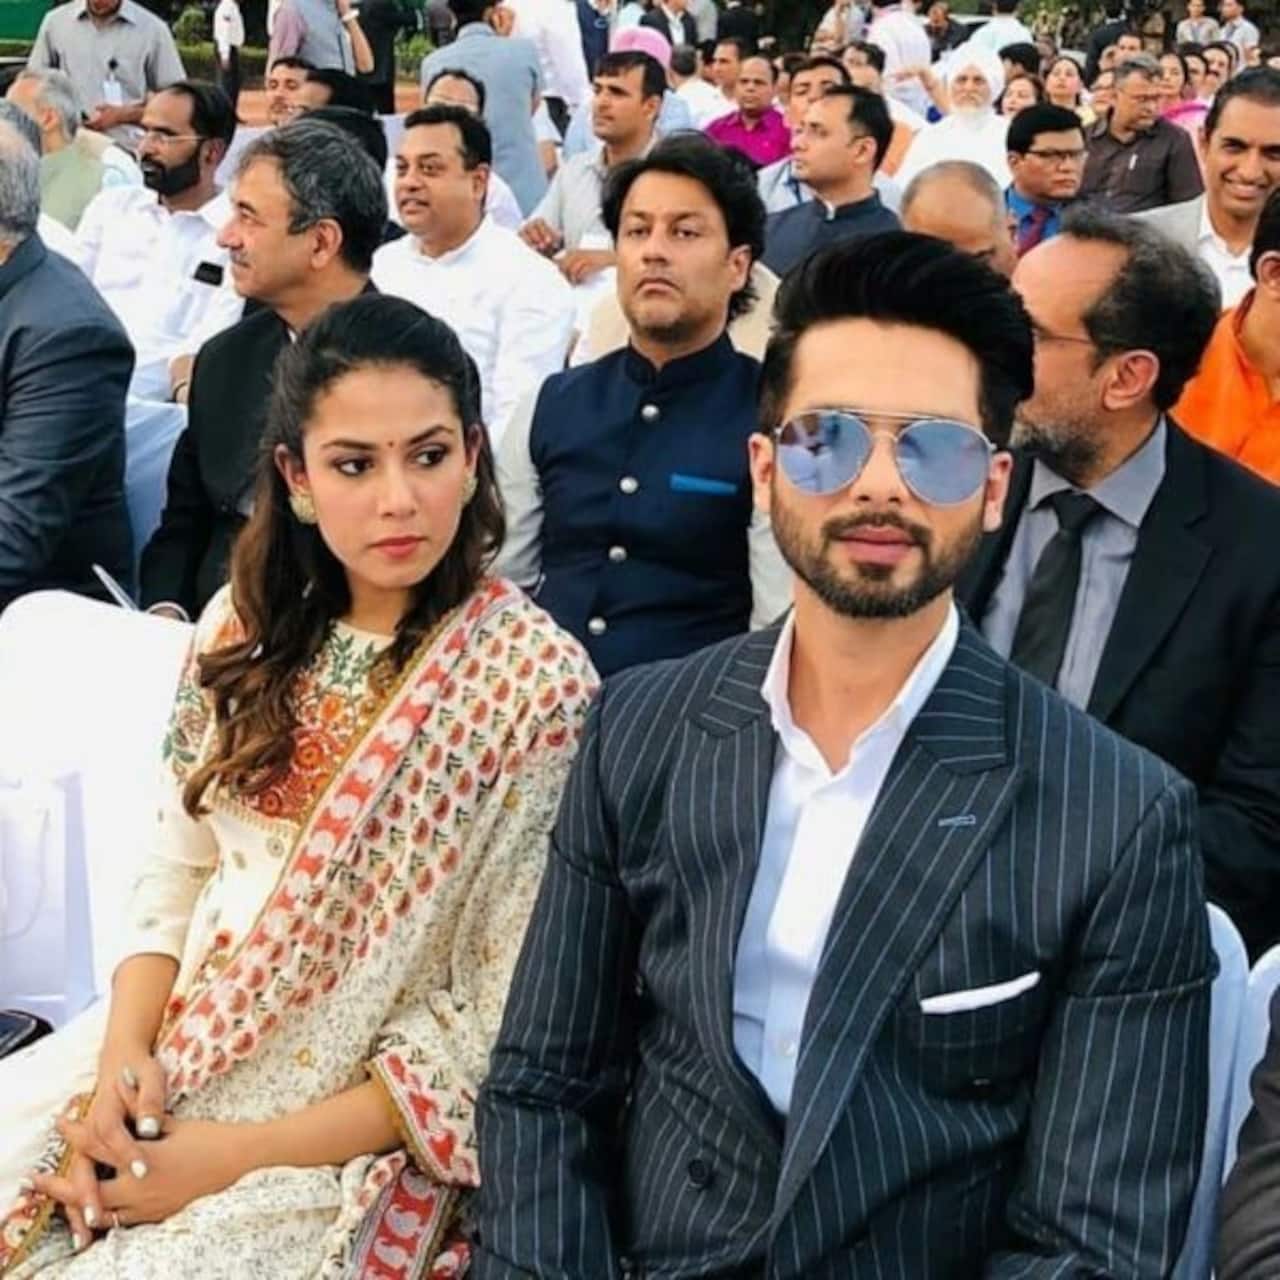 #ModiSwearingIn: Shahid Kapoor and wife Mira steal the show at the swearing-in ceremony of Narendra Modi – view pics